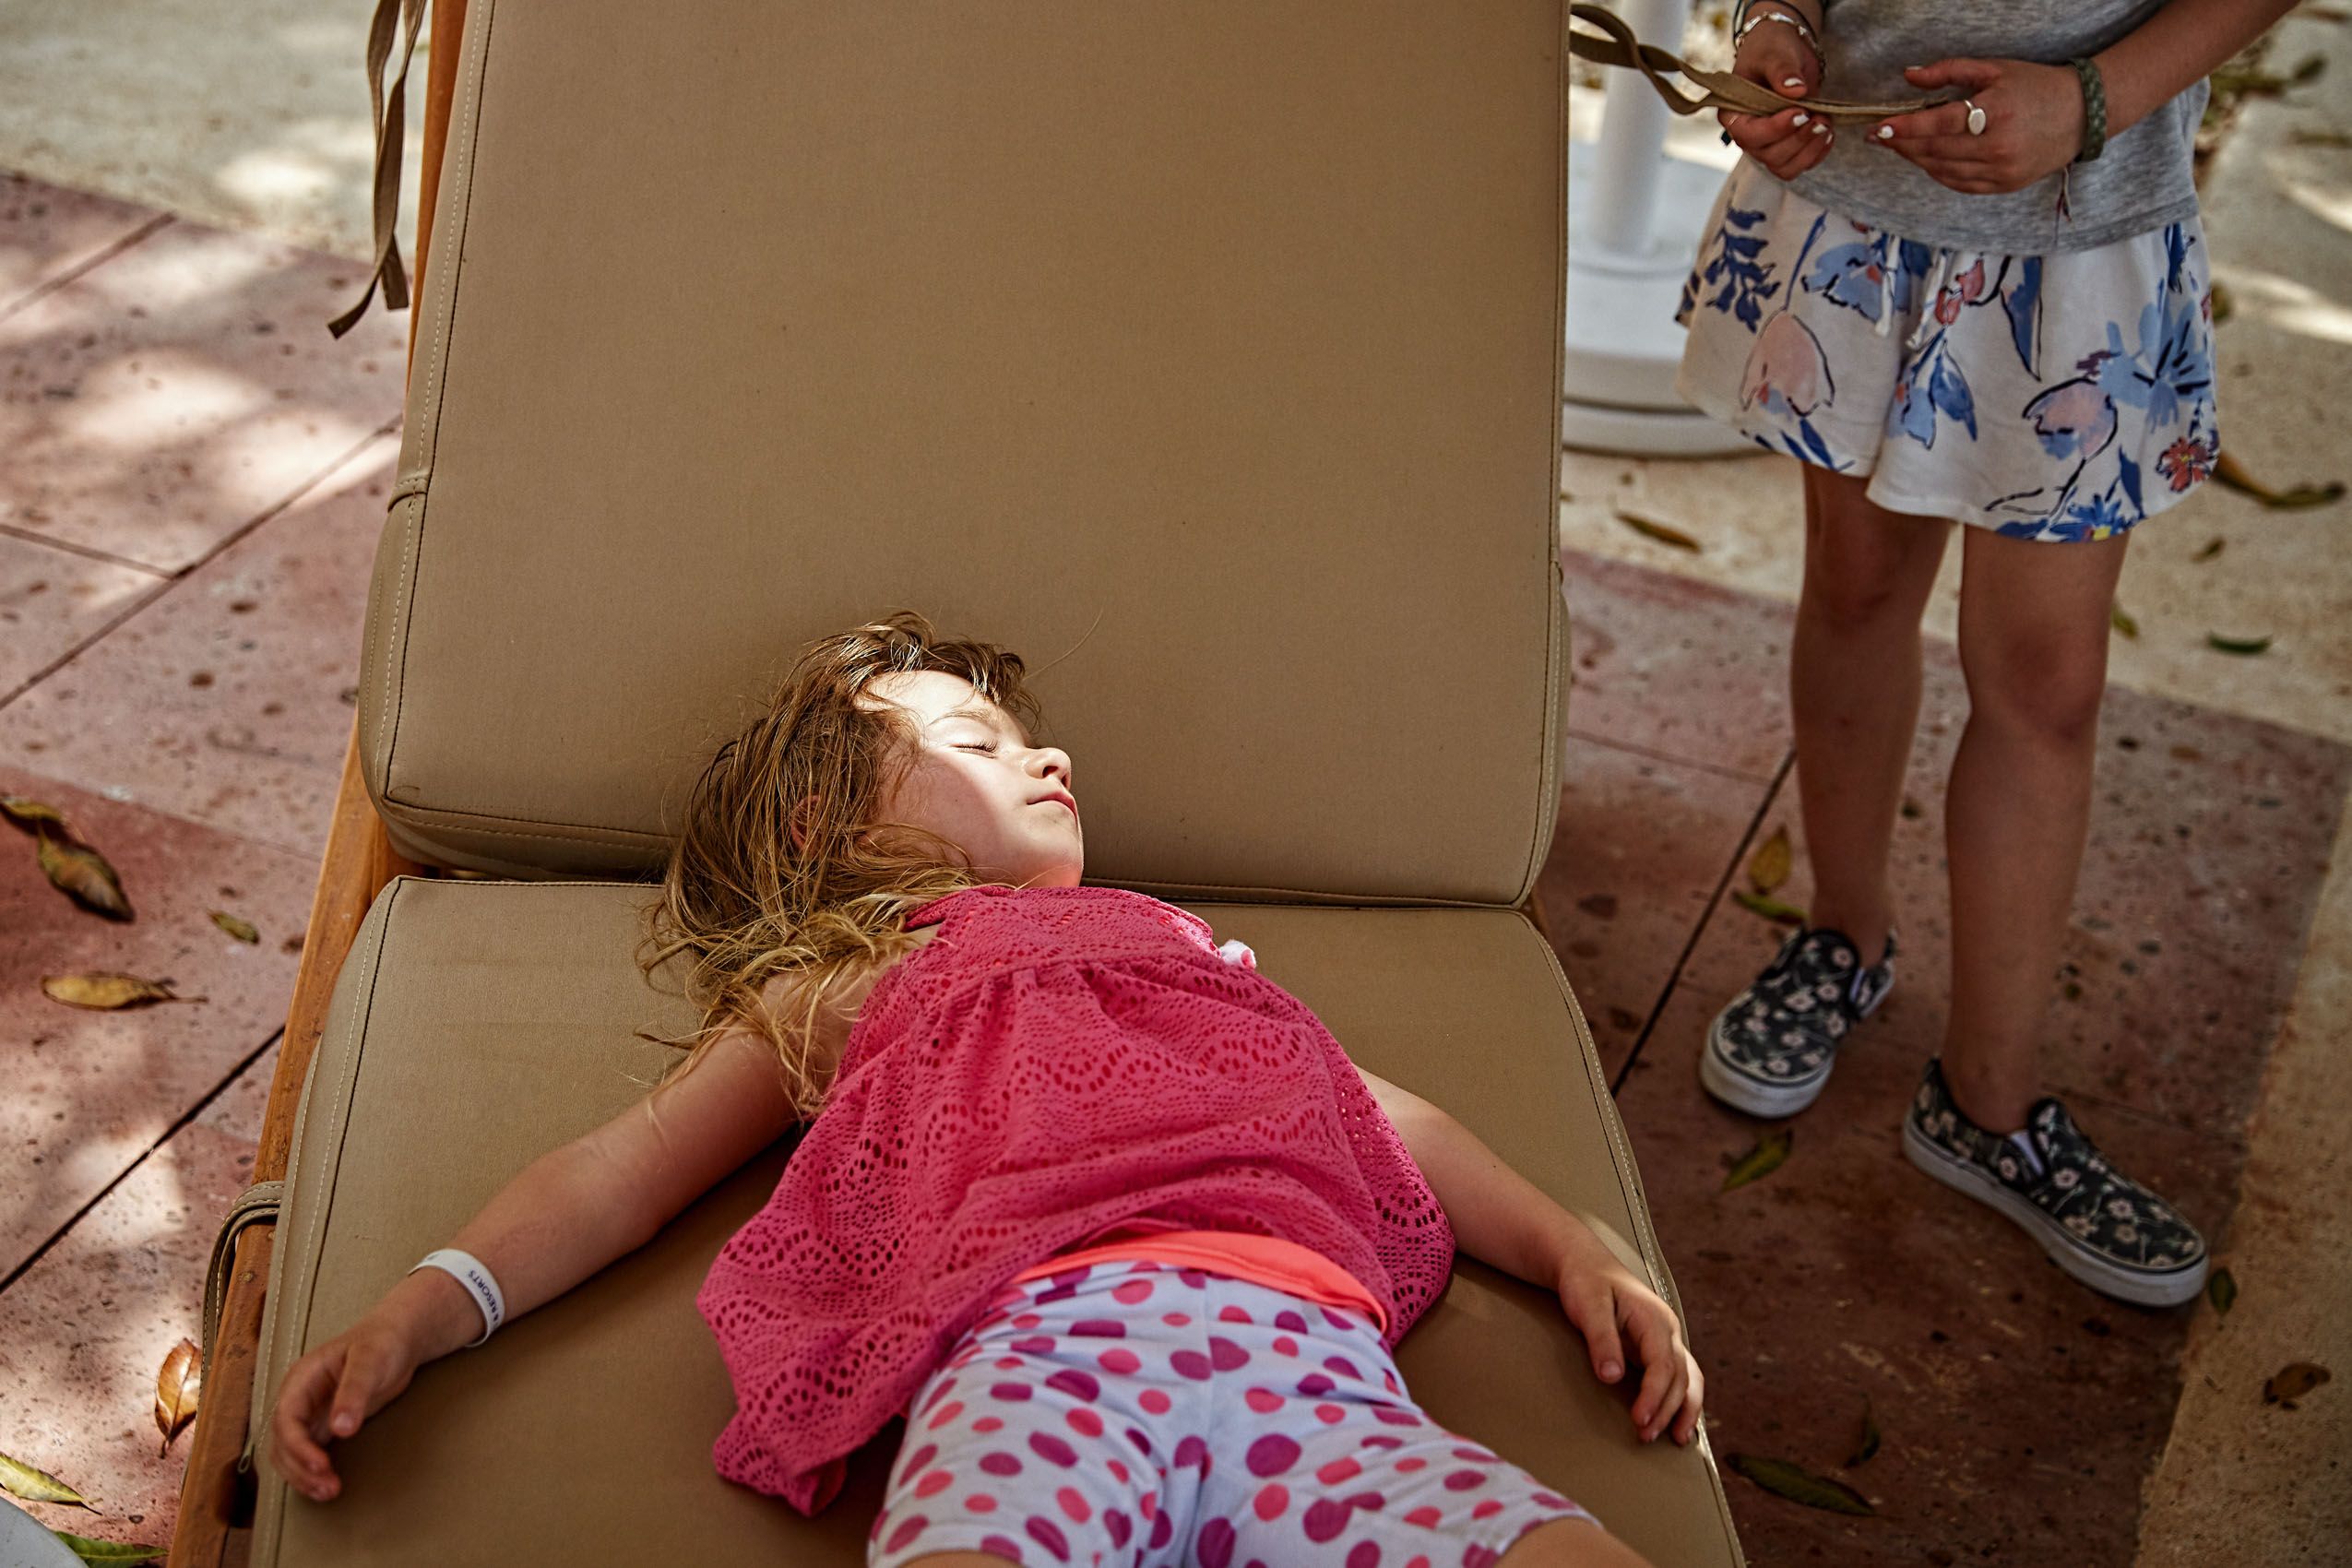 Young Girl Takes Nap on Pool Chair